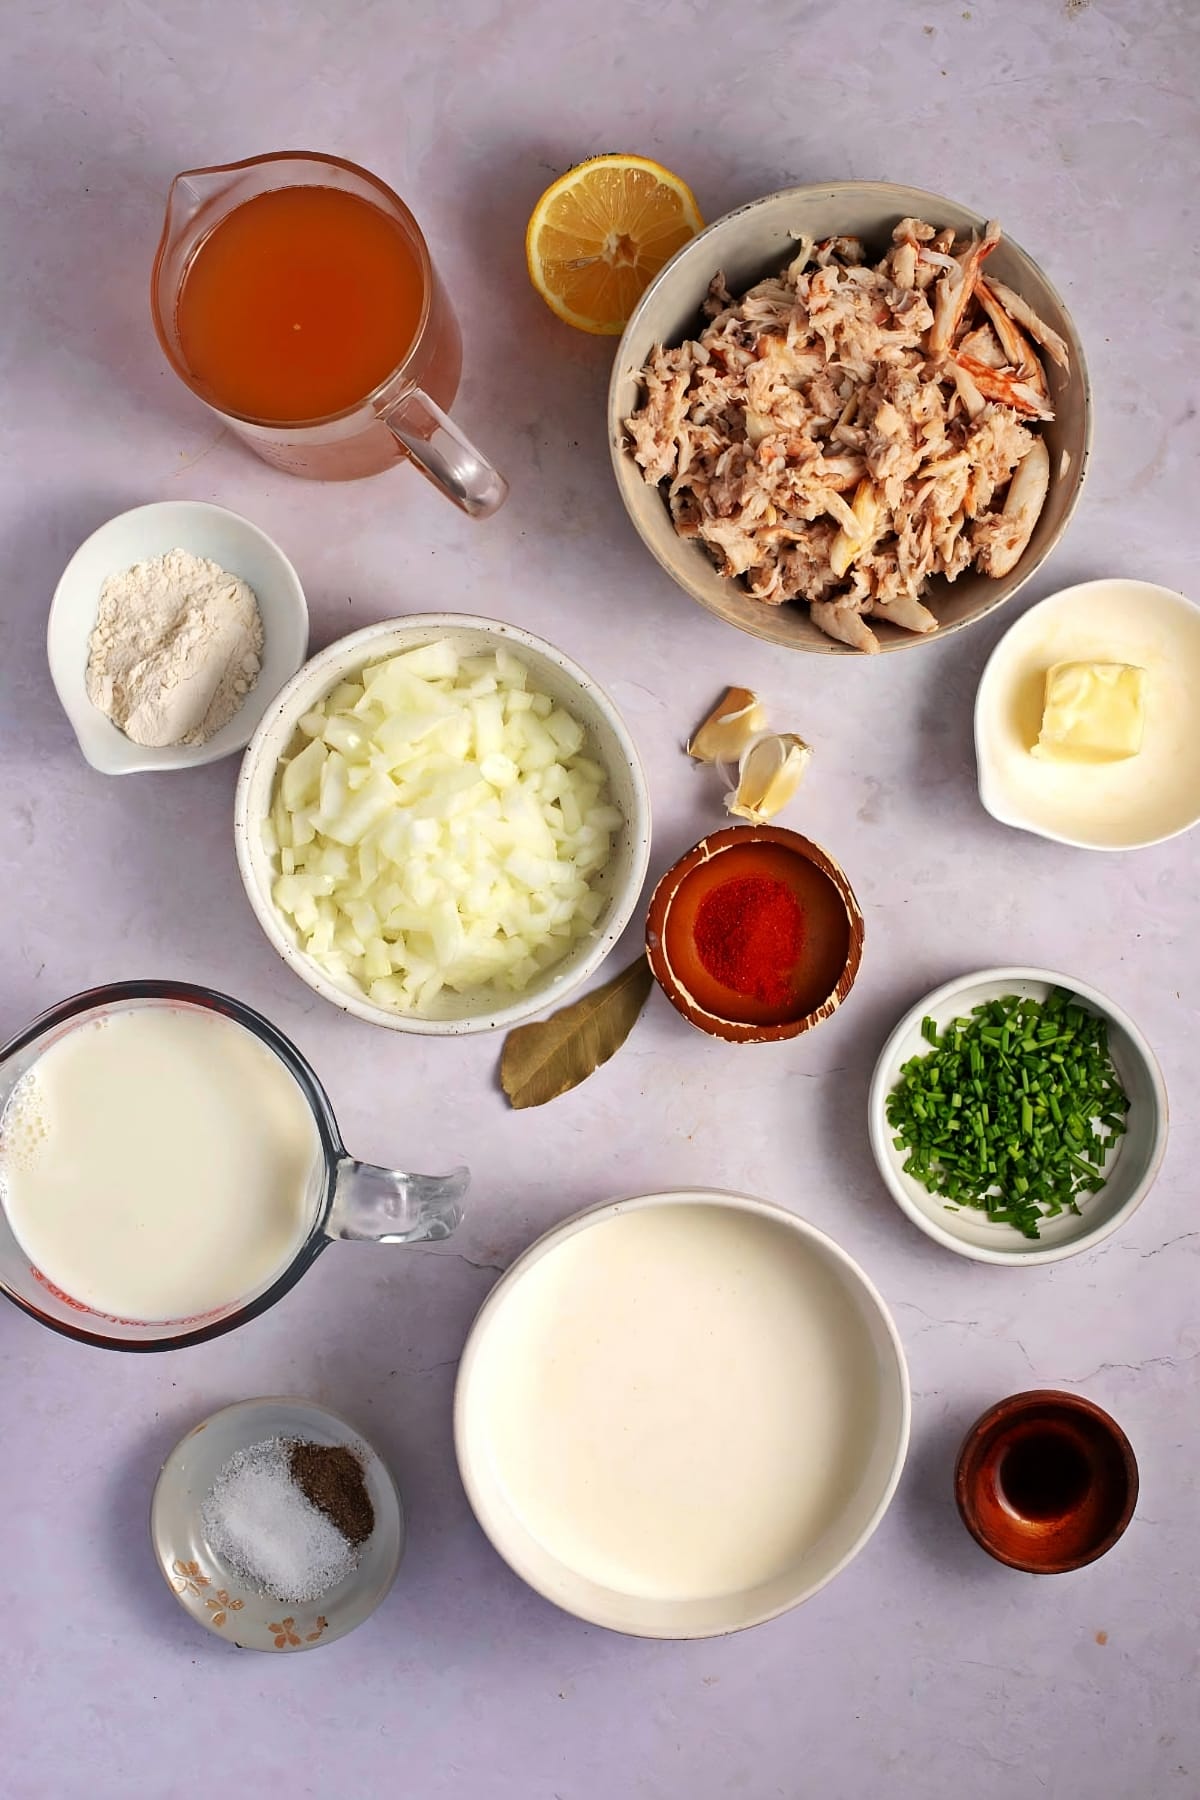 She Crab Soup Ingredients - Crab Meat, Crab Roe, Garlic Onion, Bay Leaf, Wine, Butter, Crab Stock, Milk & Heavy Cream, Paprika, Lemon Juice, Salt, Pepper and Chives
